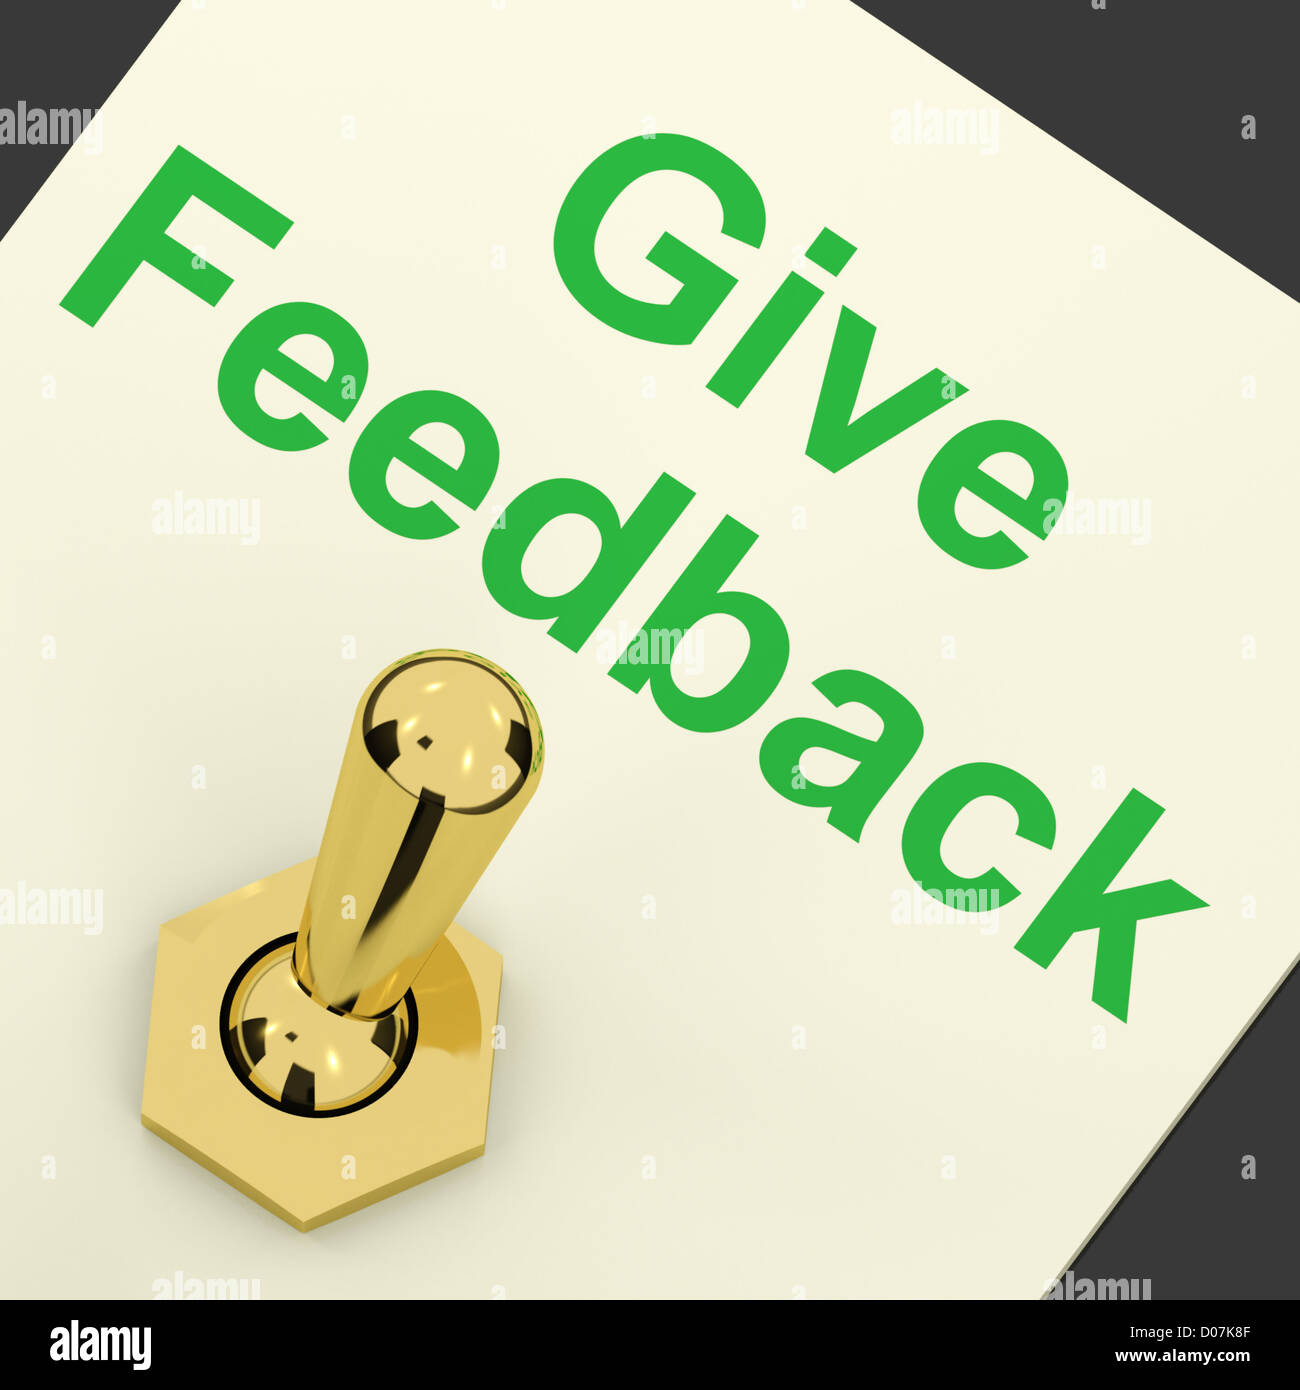 Give Feedback Switch On Showing Opinions And Surveys Stock Photo